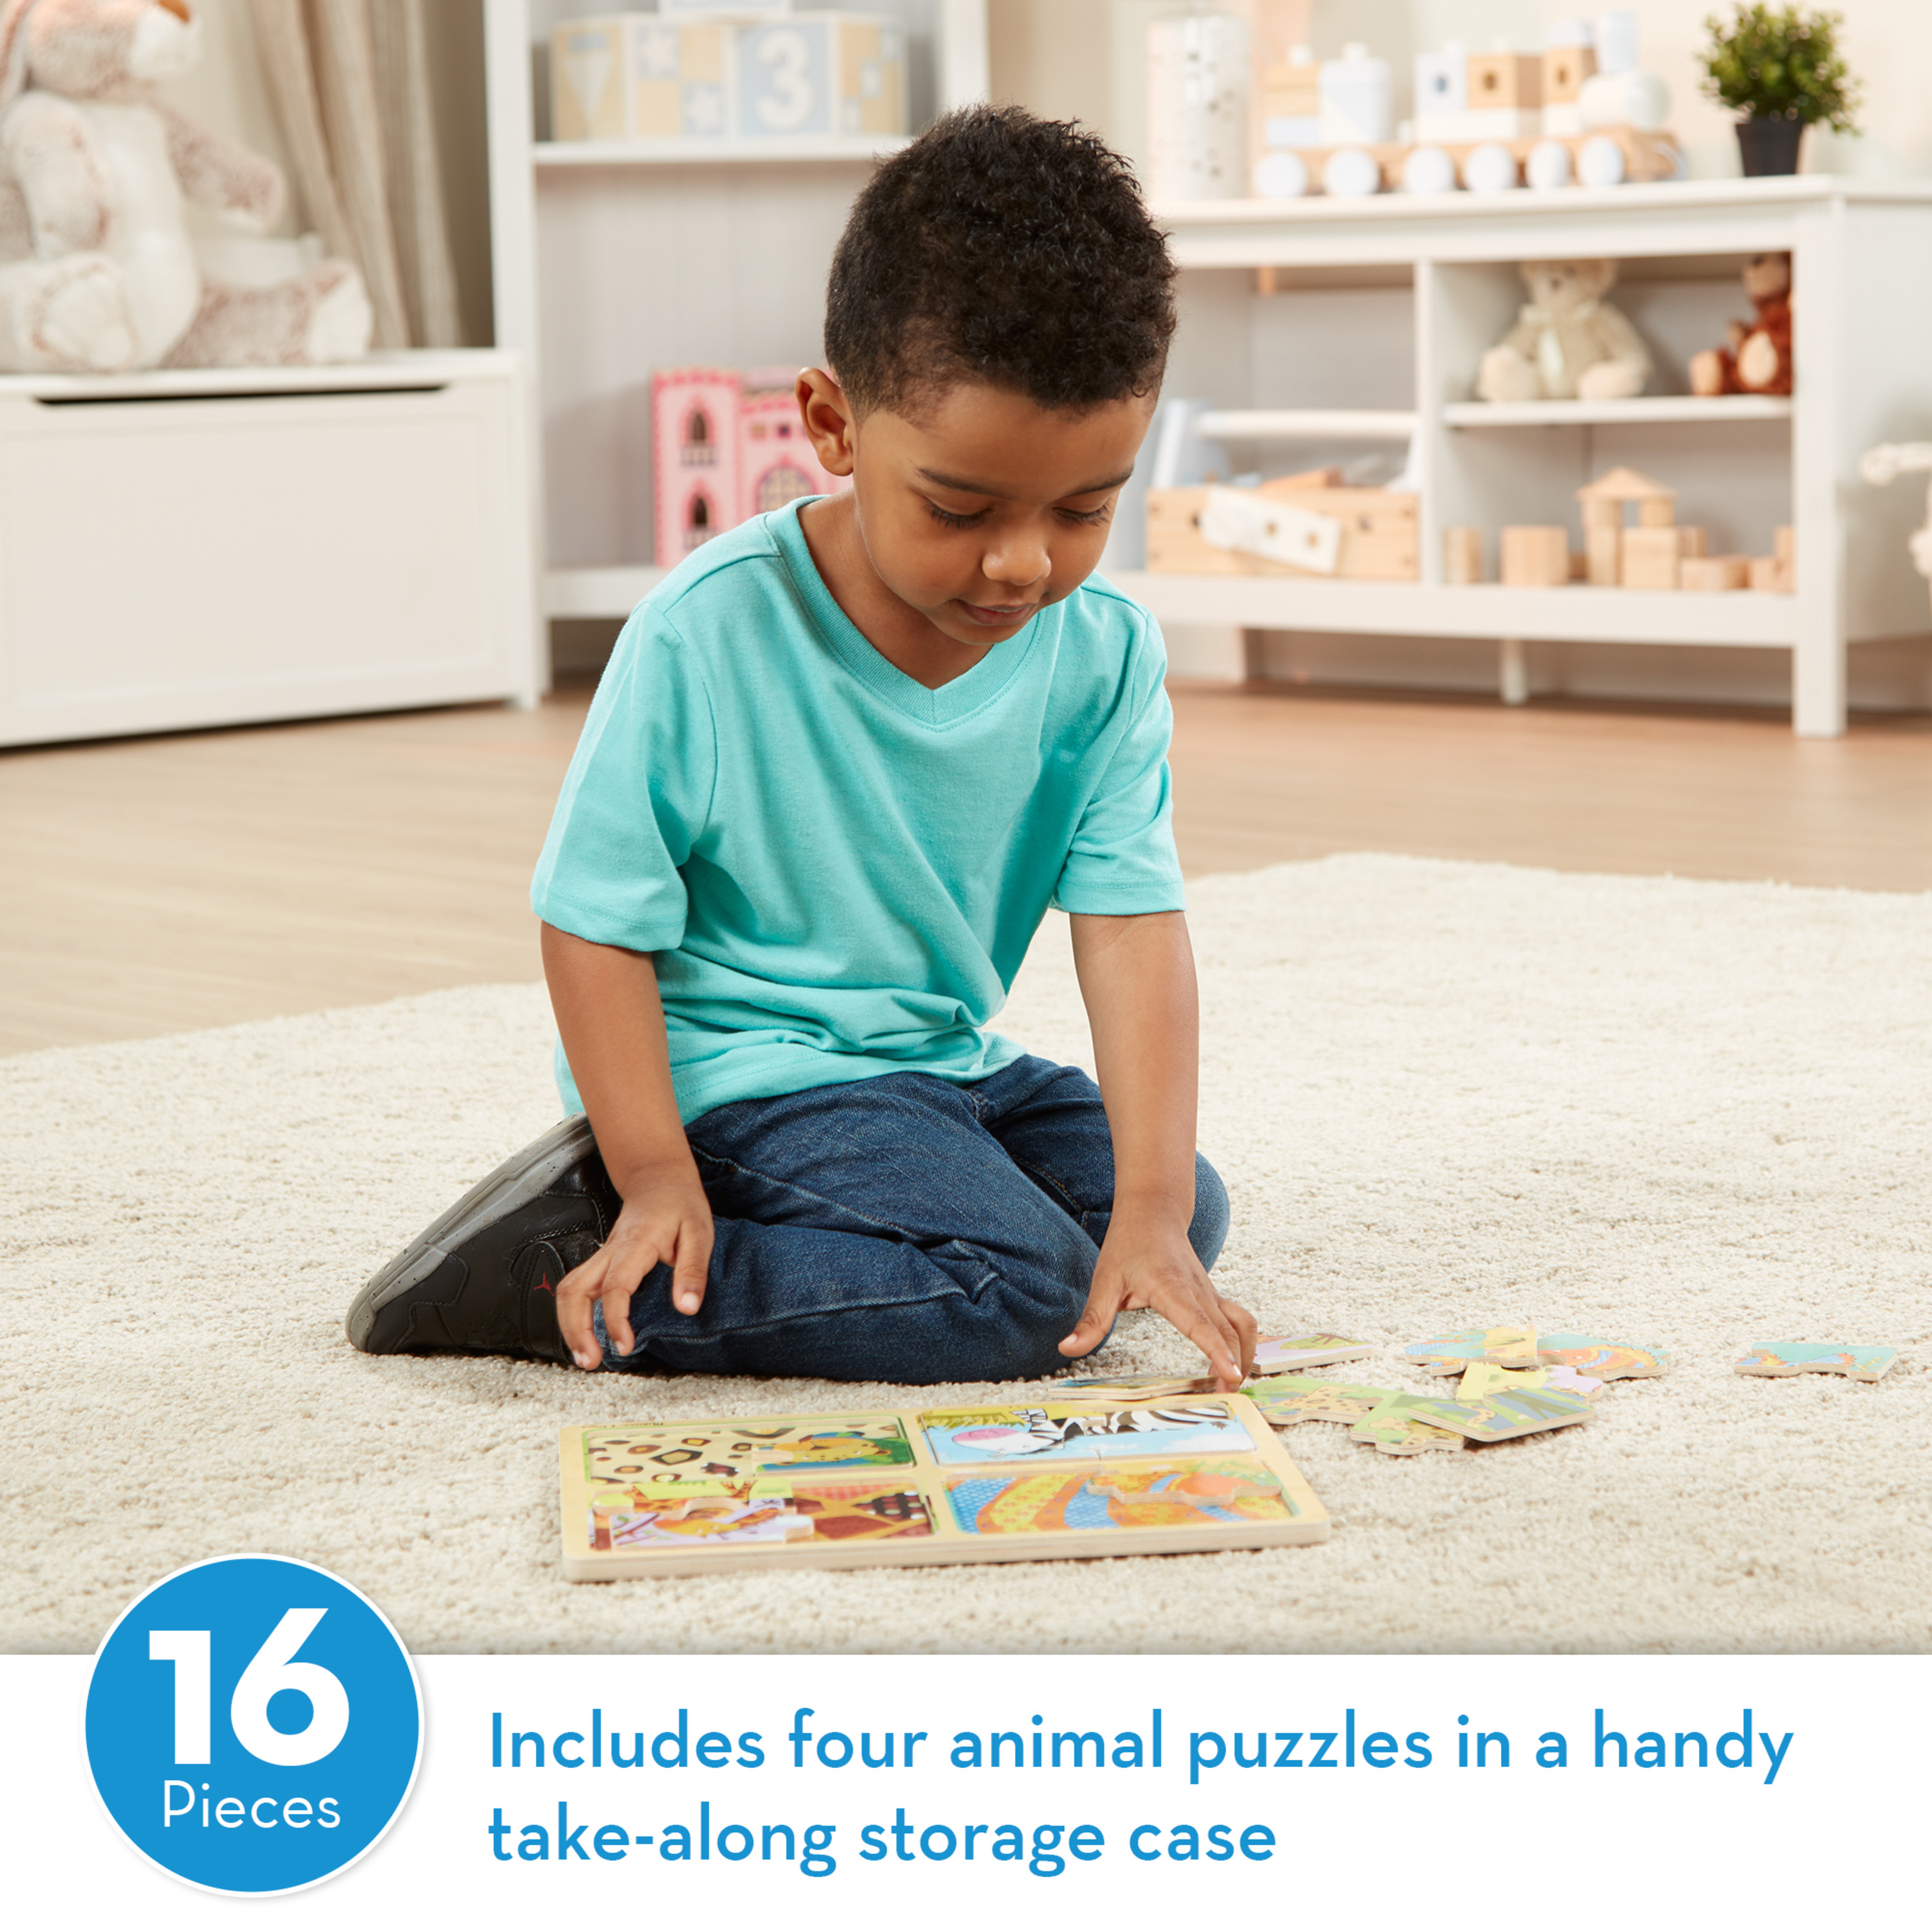 Melissa & Doug Natural Play Wooden Puzzle: Animal Patterns (Four 4-Piece Animal Puzzles) - image 2 of 5